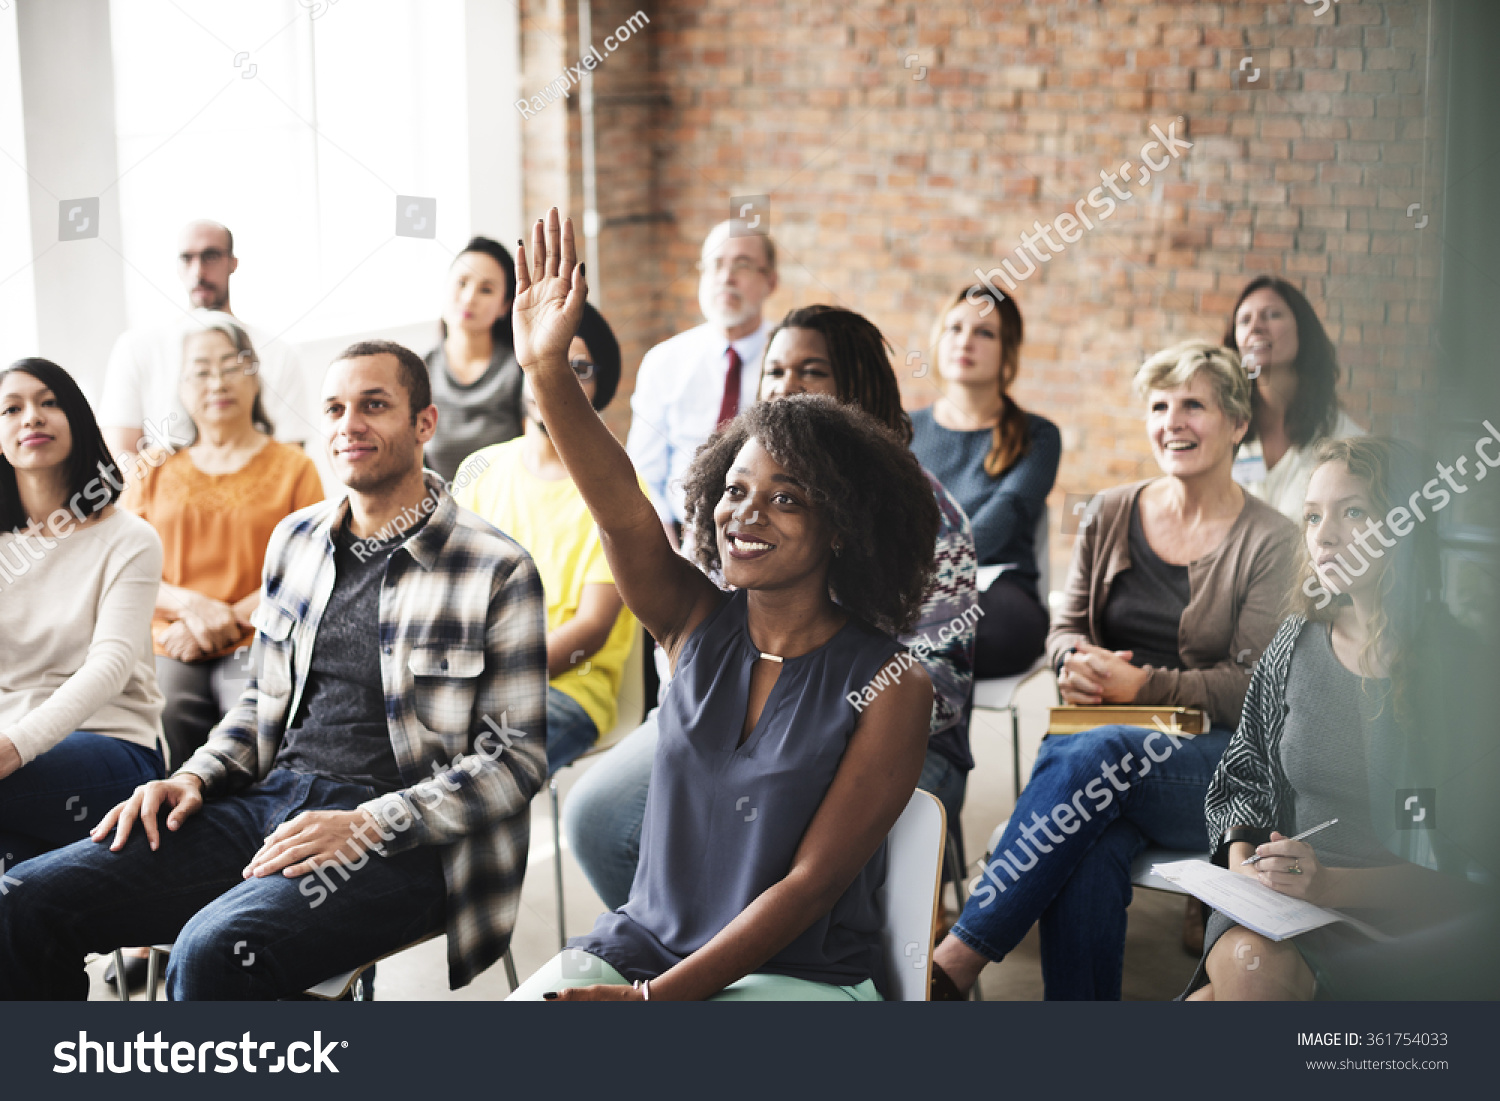 Audience Meeting Seminar Arms Raised Asking Concept #361754033